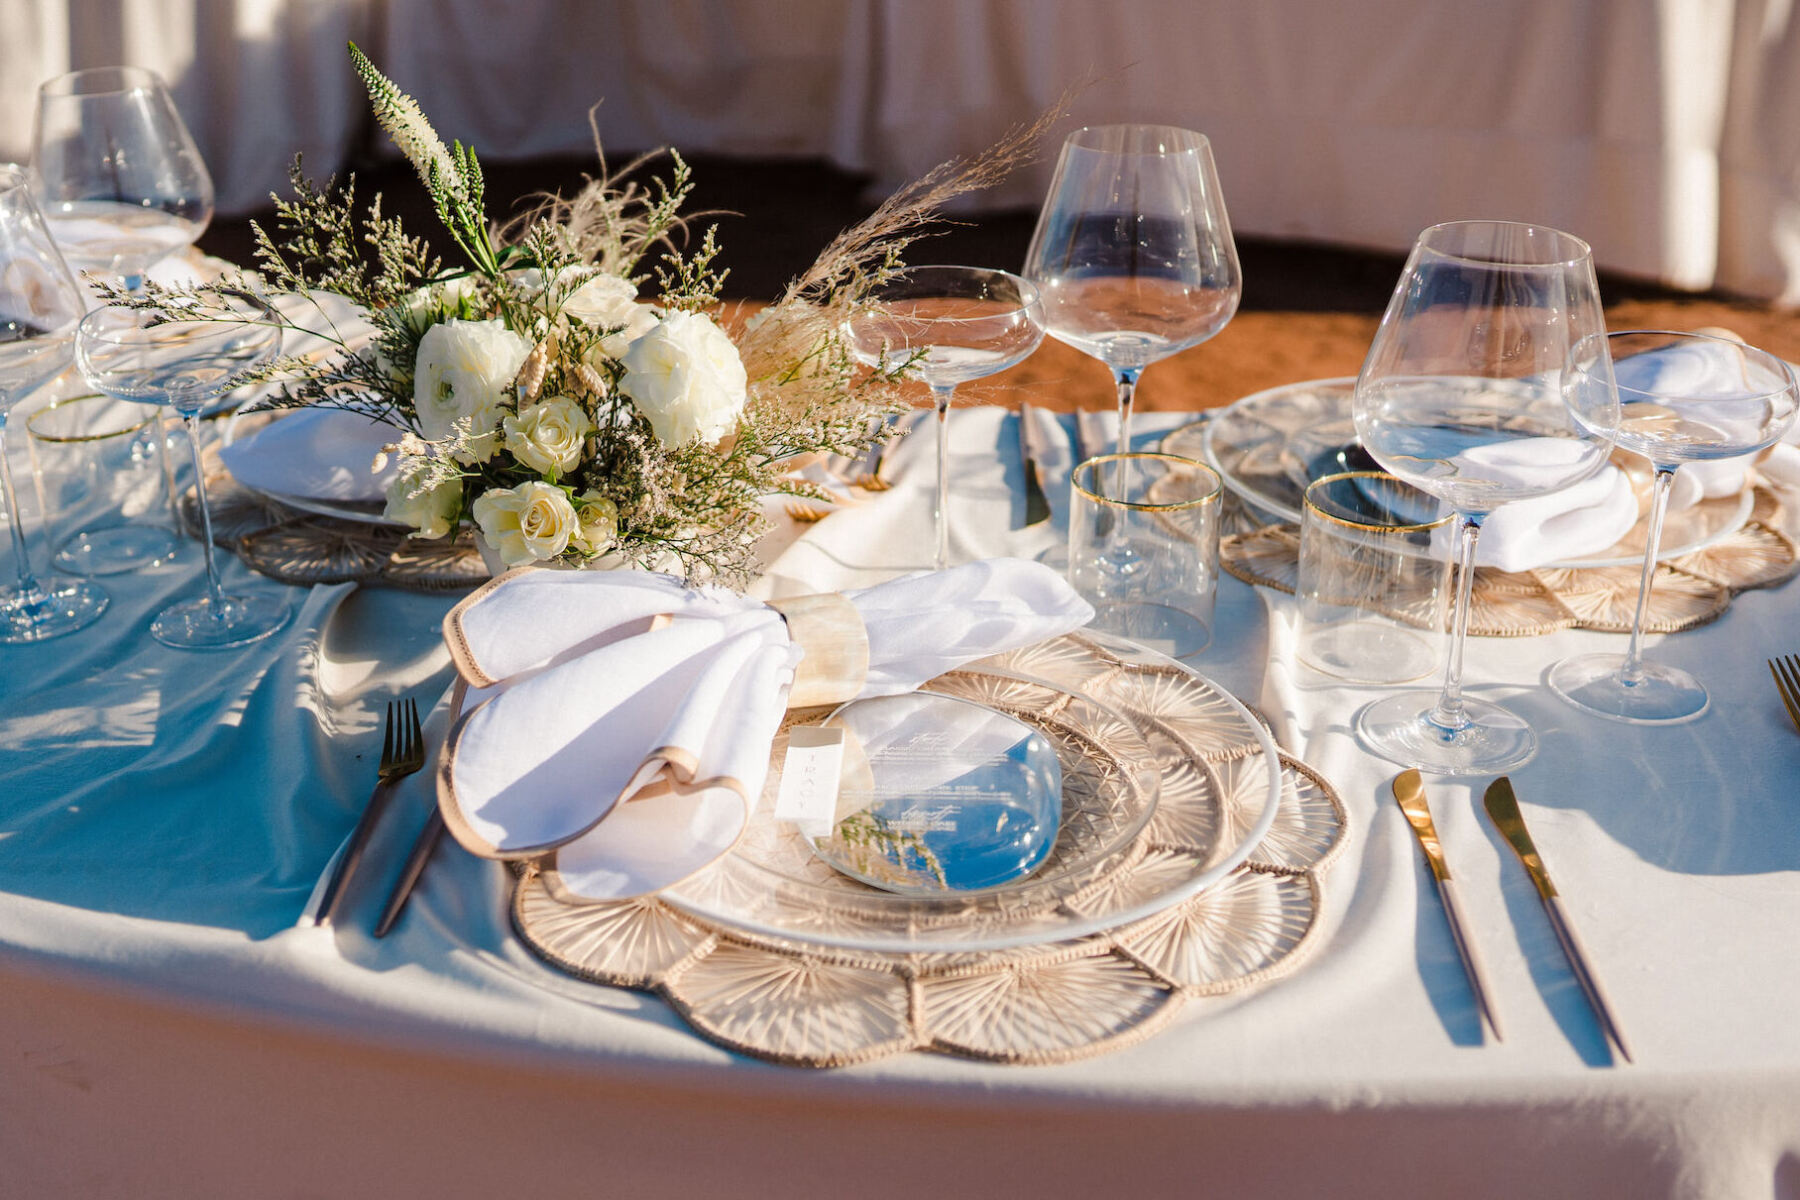 Woven chargers, clear plates, and edged napkins created a beautiful tablescape at this modern, bohemian desert wedding.